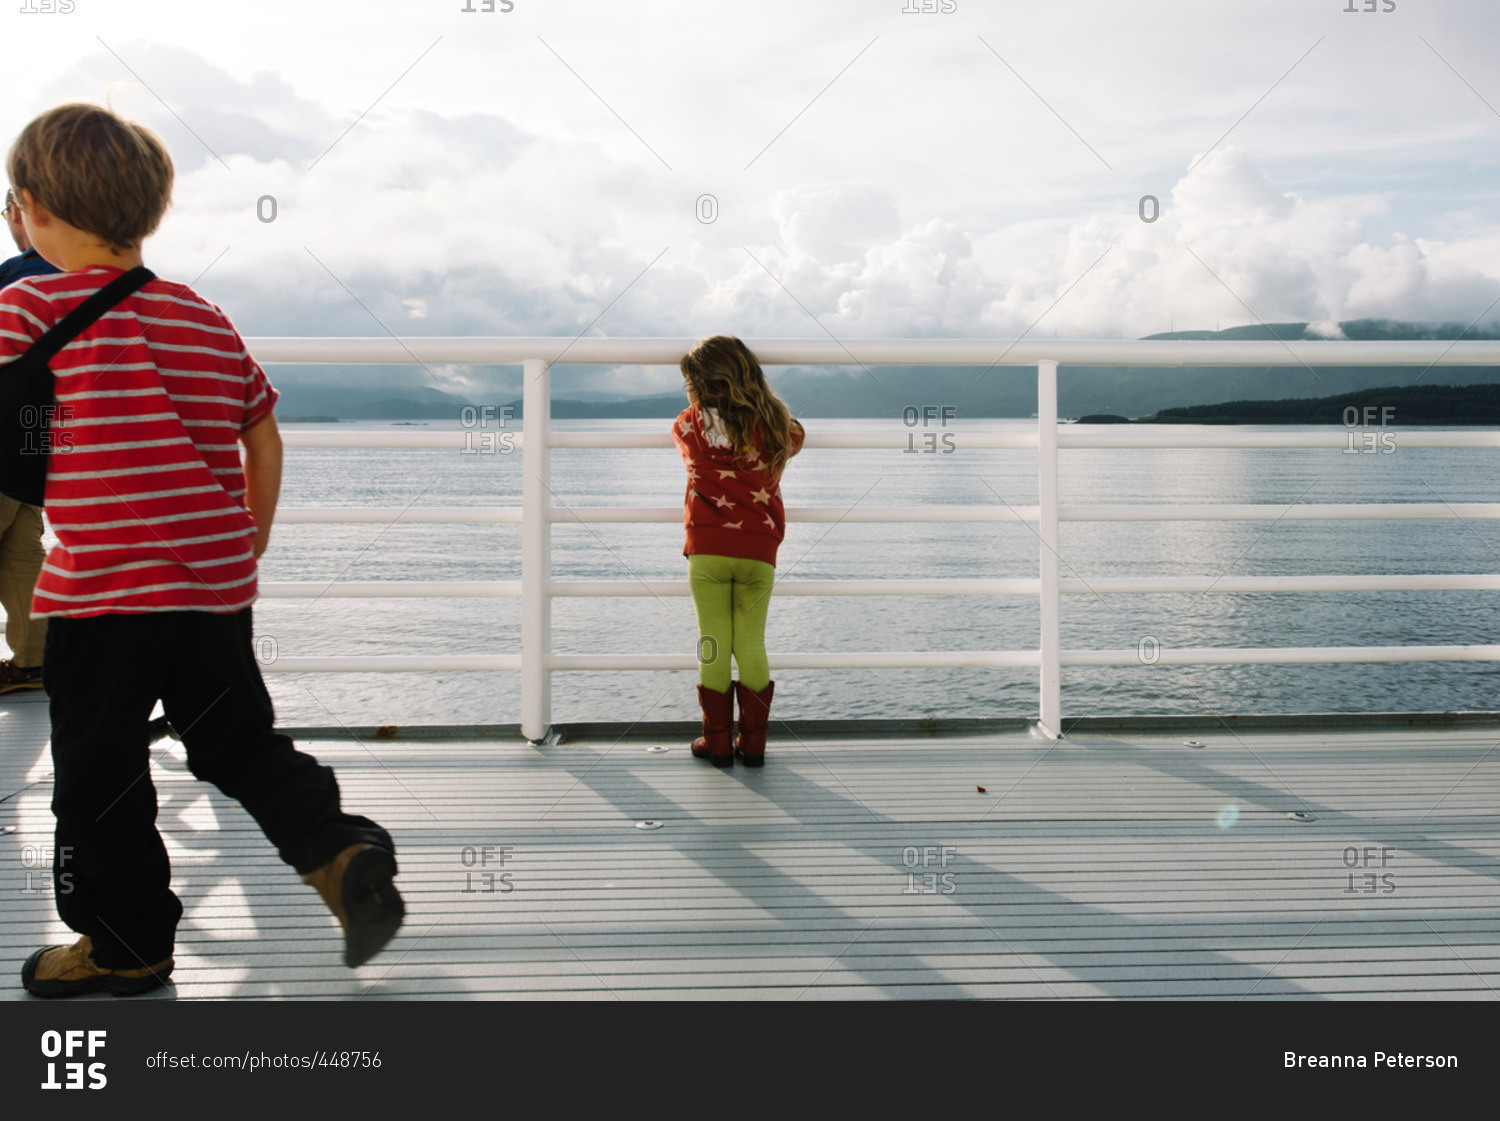 Kids on a ferry in remote setting